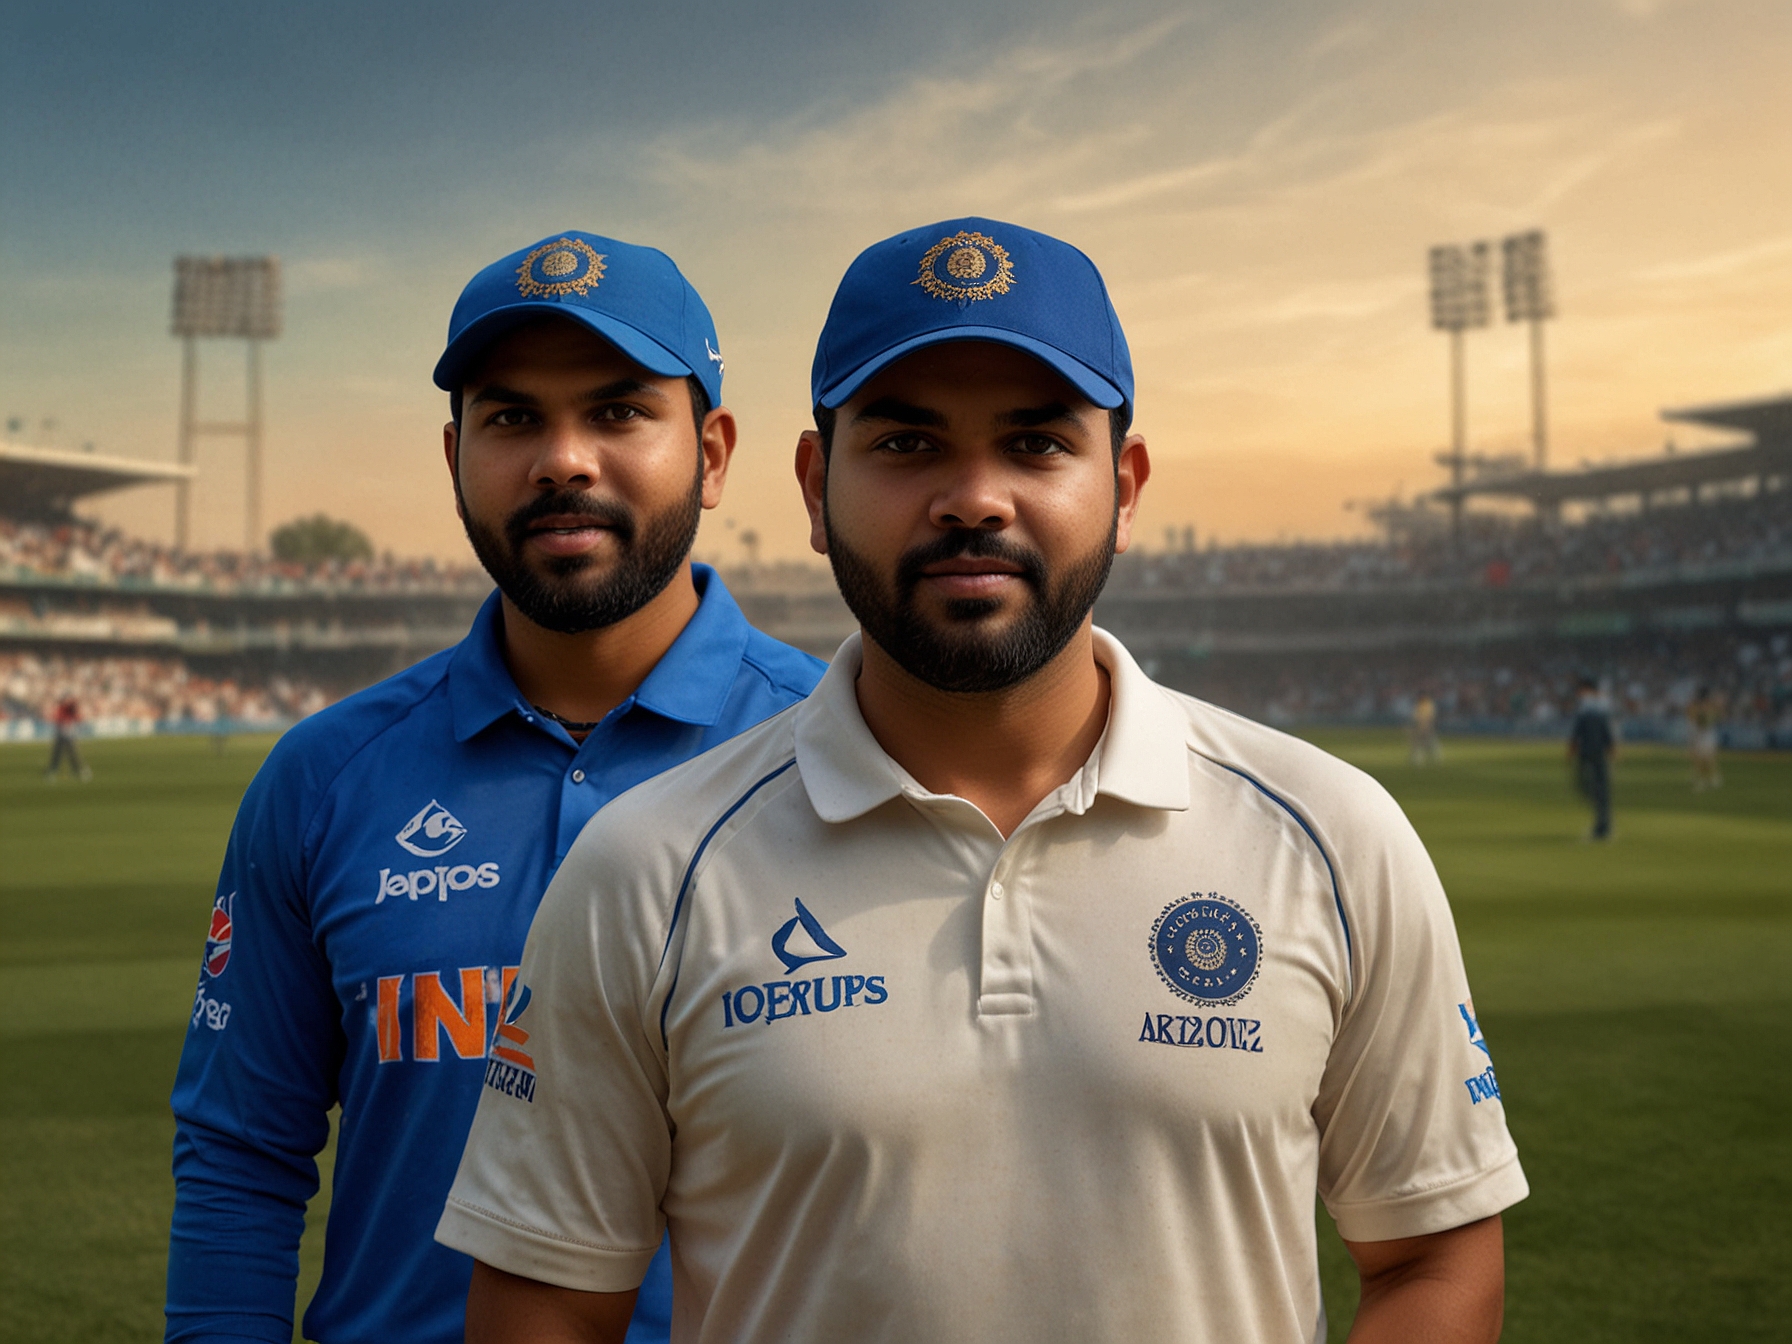 Rohit Sharma and Aiden Markram standing on the pitch alongside the umpire, ready for the coin toss ceremony under high anticipation from fans and analysts.